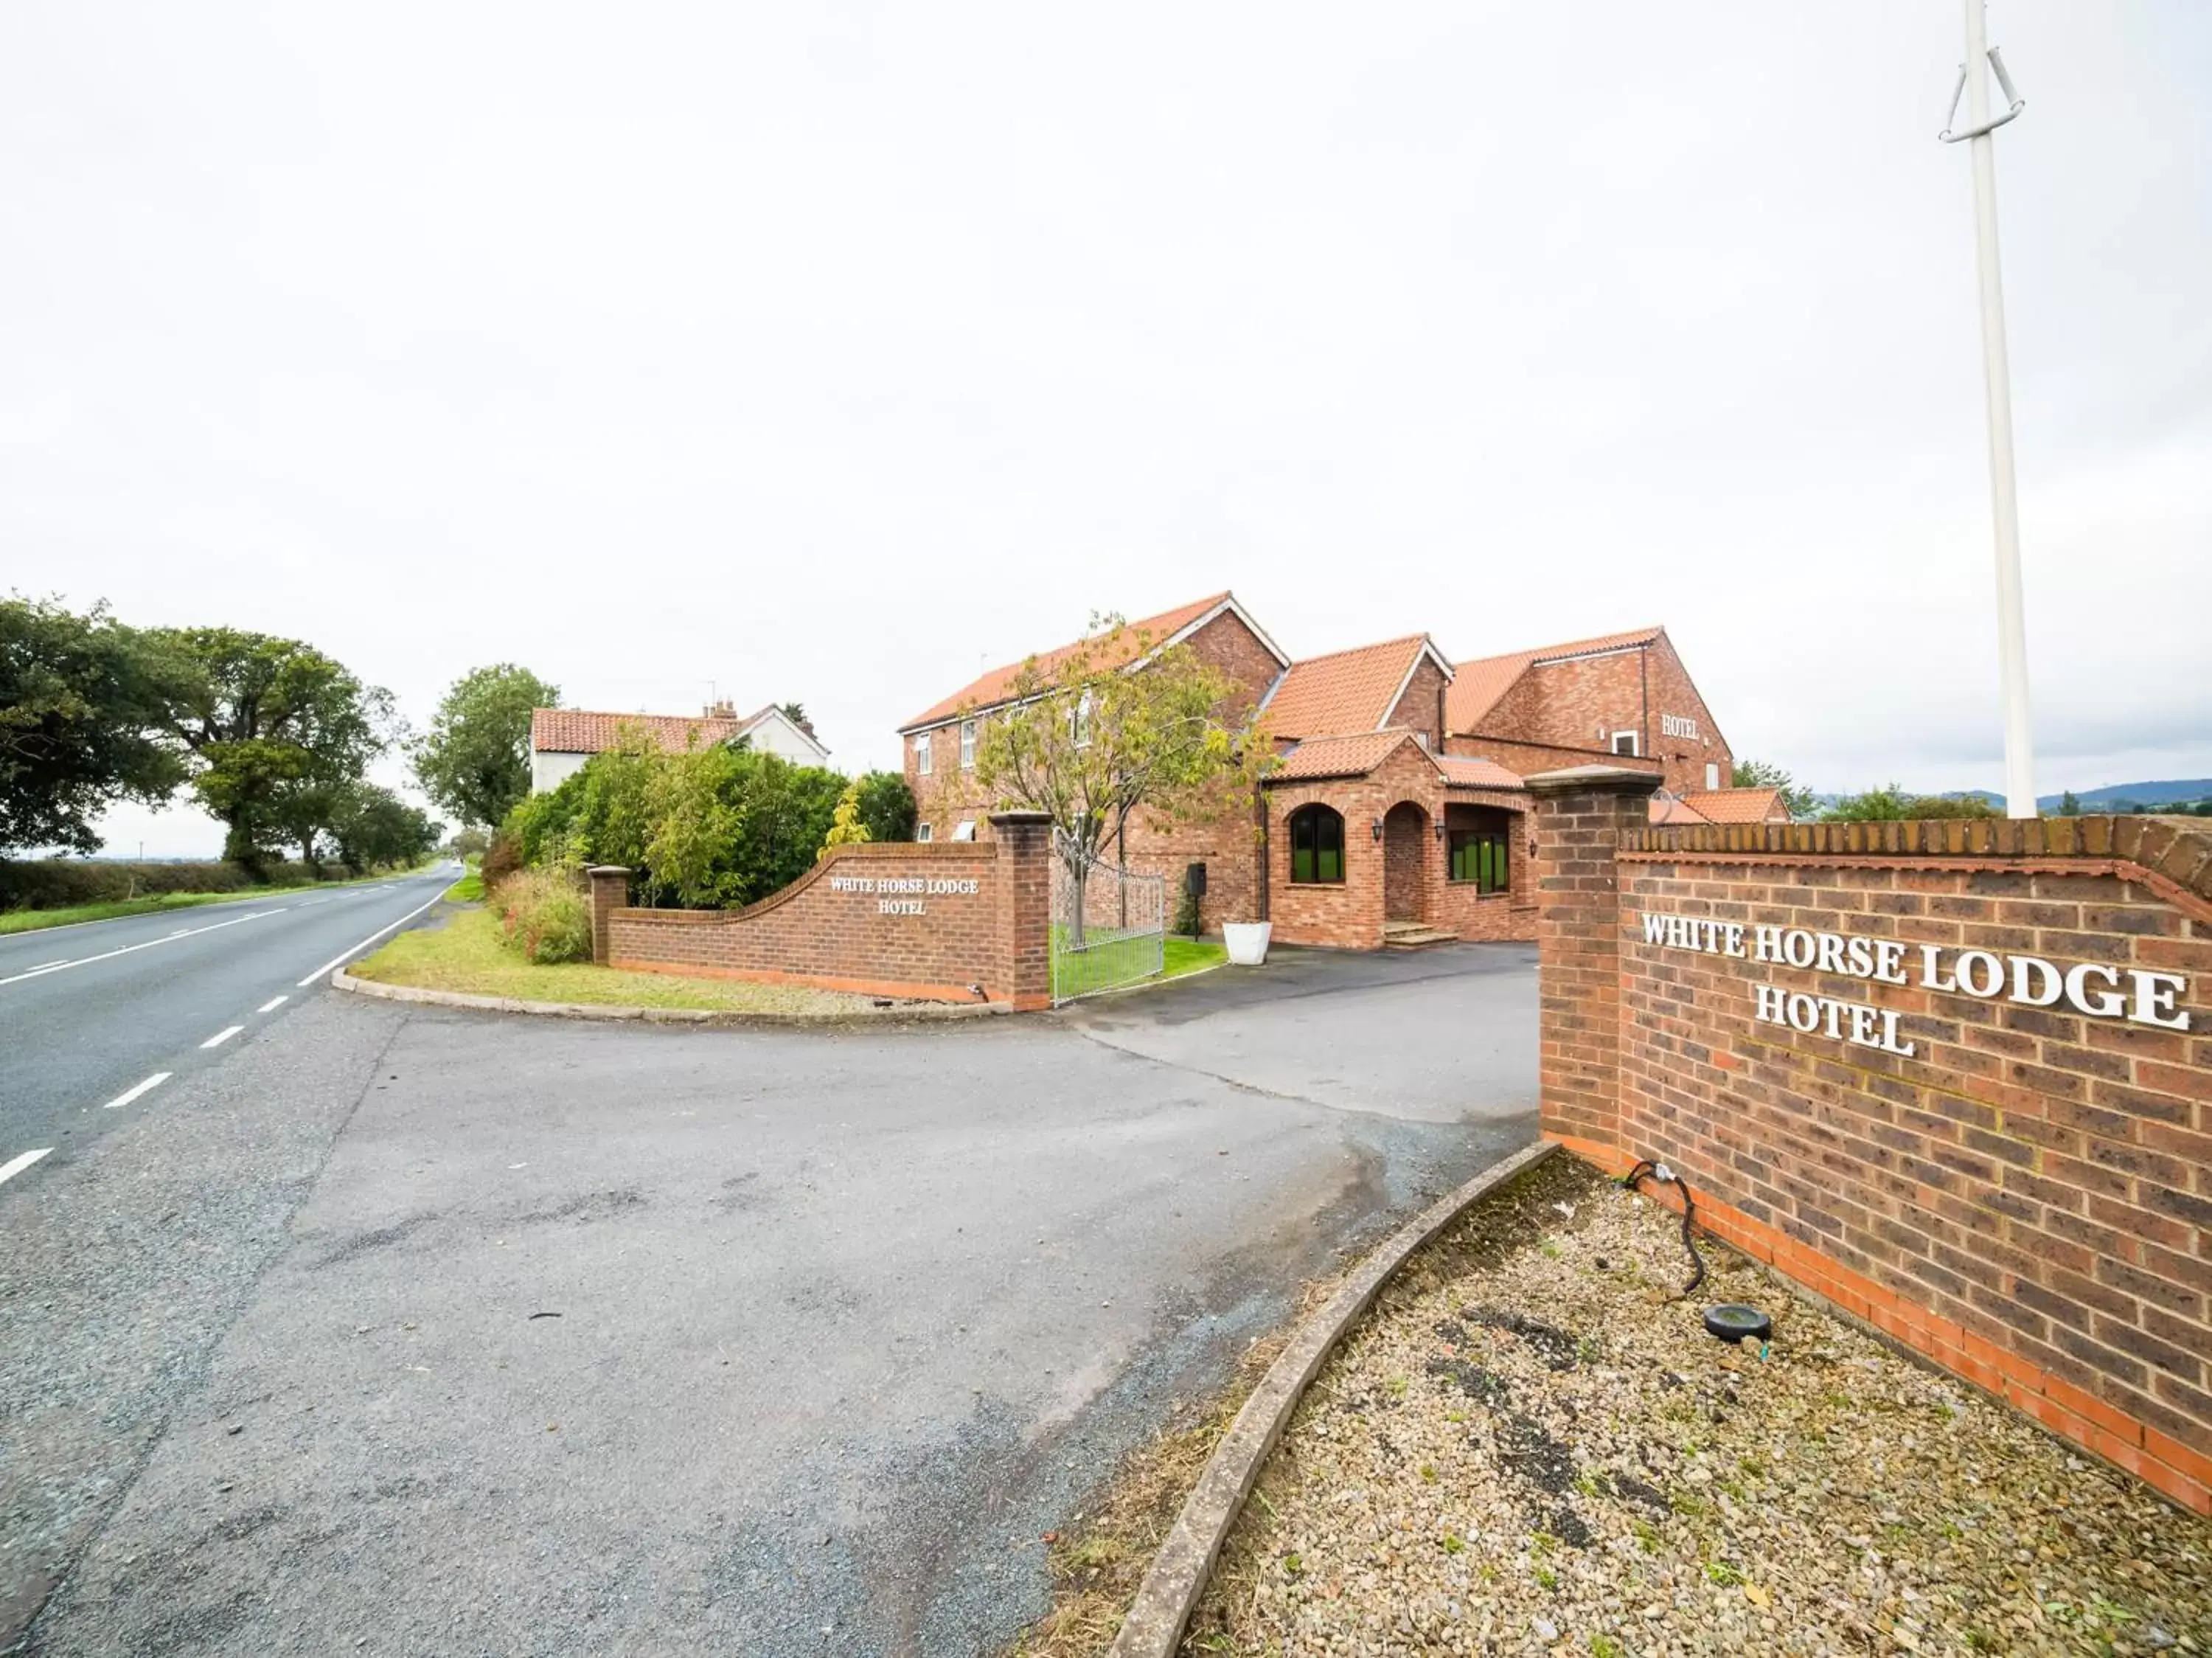 Property building, Neighborhood in OYO White Horse Lodge Hotel, East Thirsk